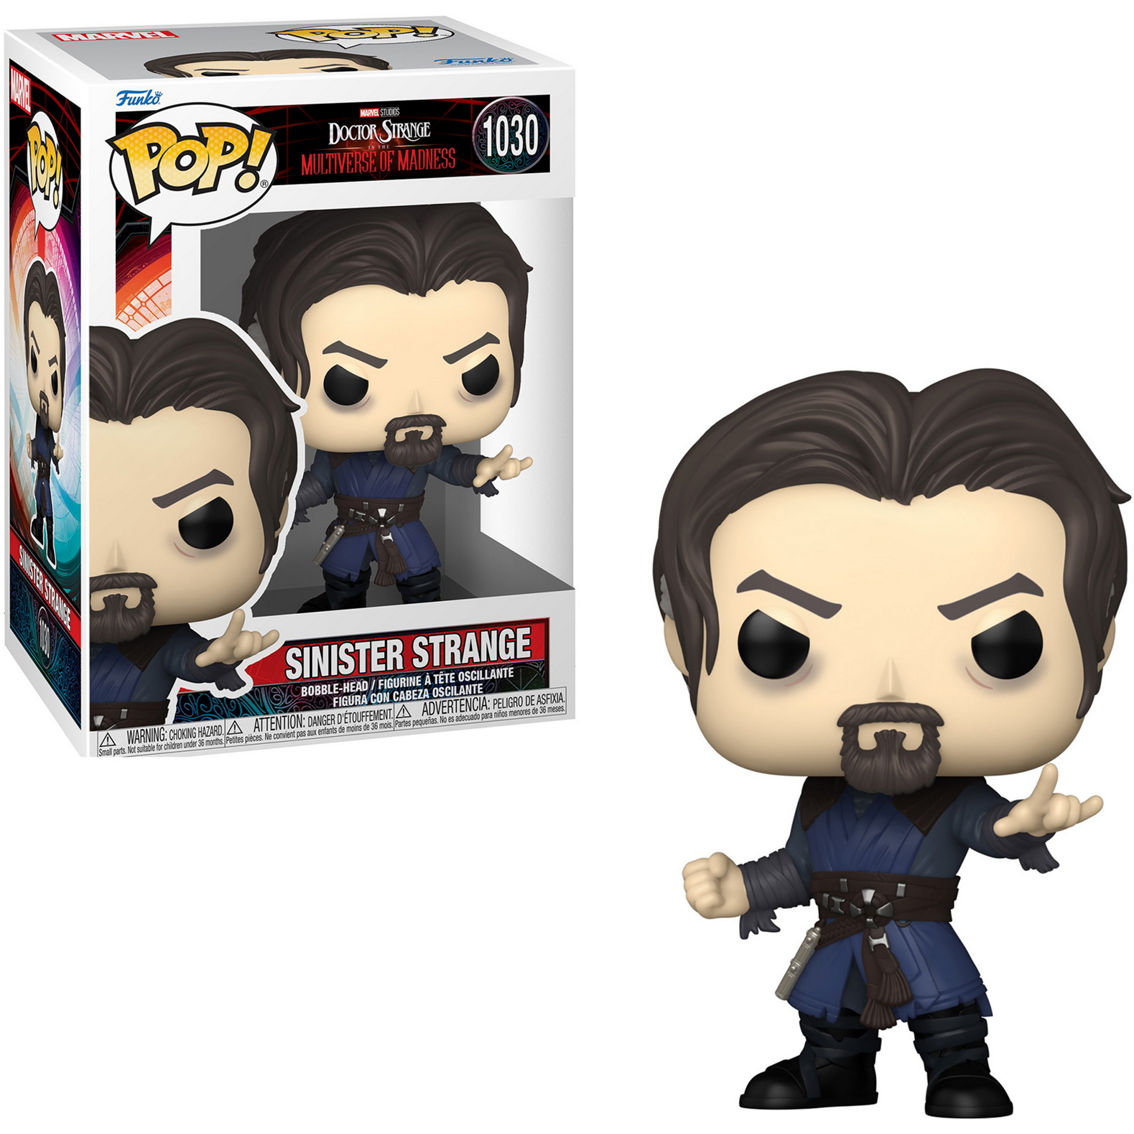 Funko Pop! Marvel: Doctor Strange in the Multiverse of Madness Collectors Set - Image 4 of 7